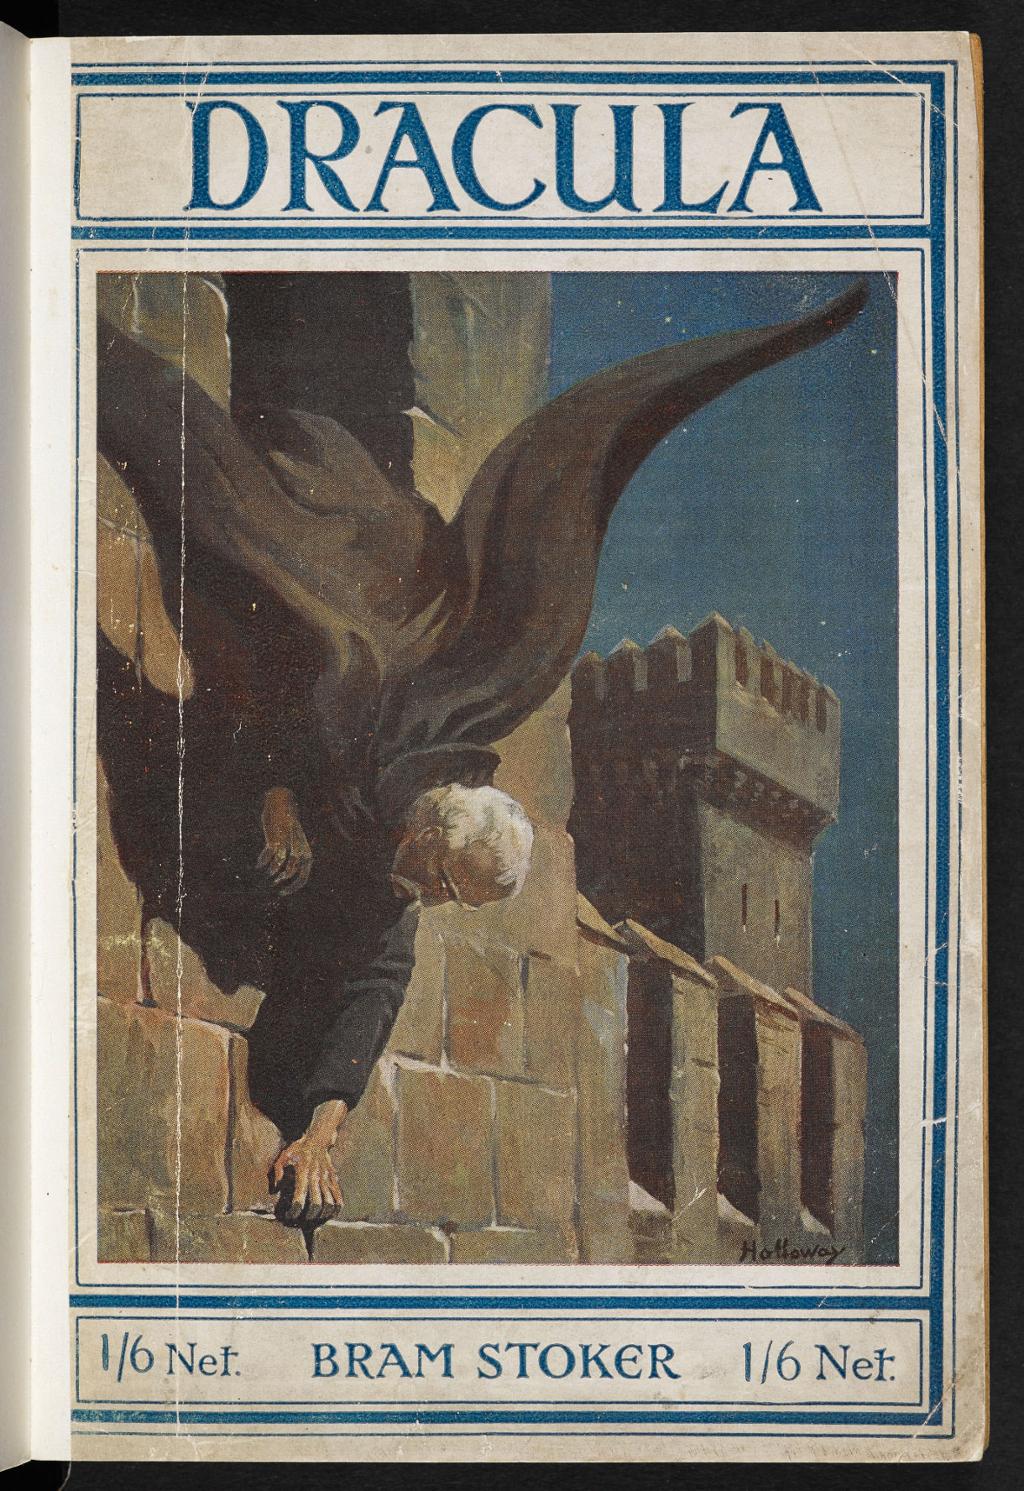 Photo: Book cover for teh book Dracula. We see a man,dressed in black, crawling down the side of a castle, head first.